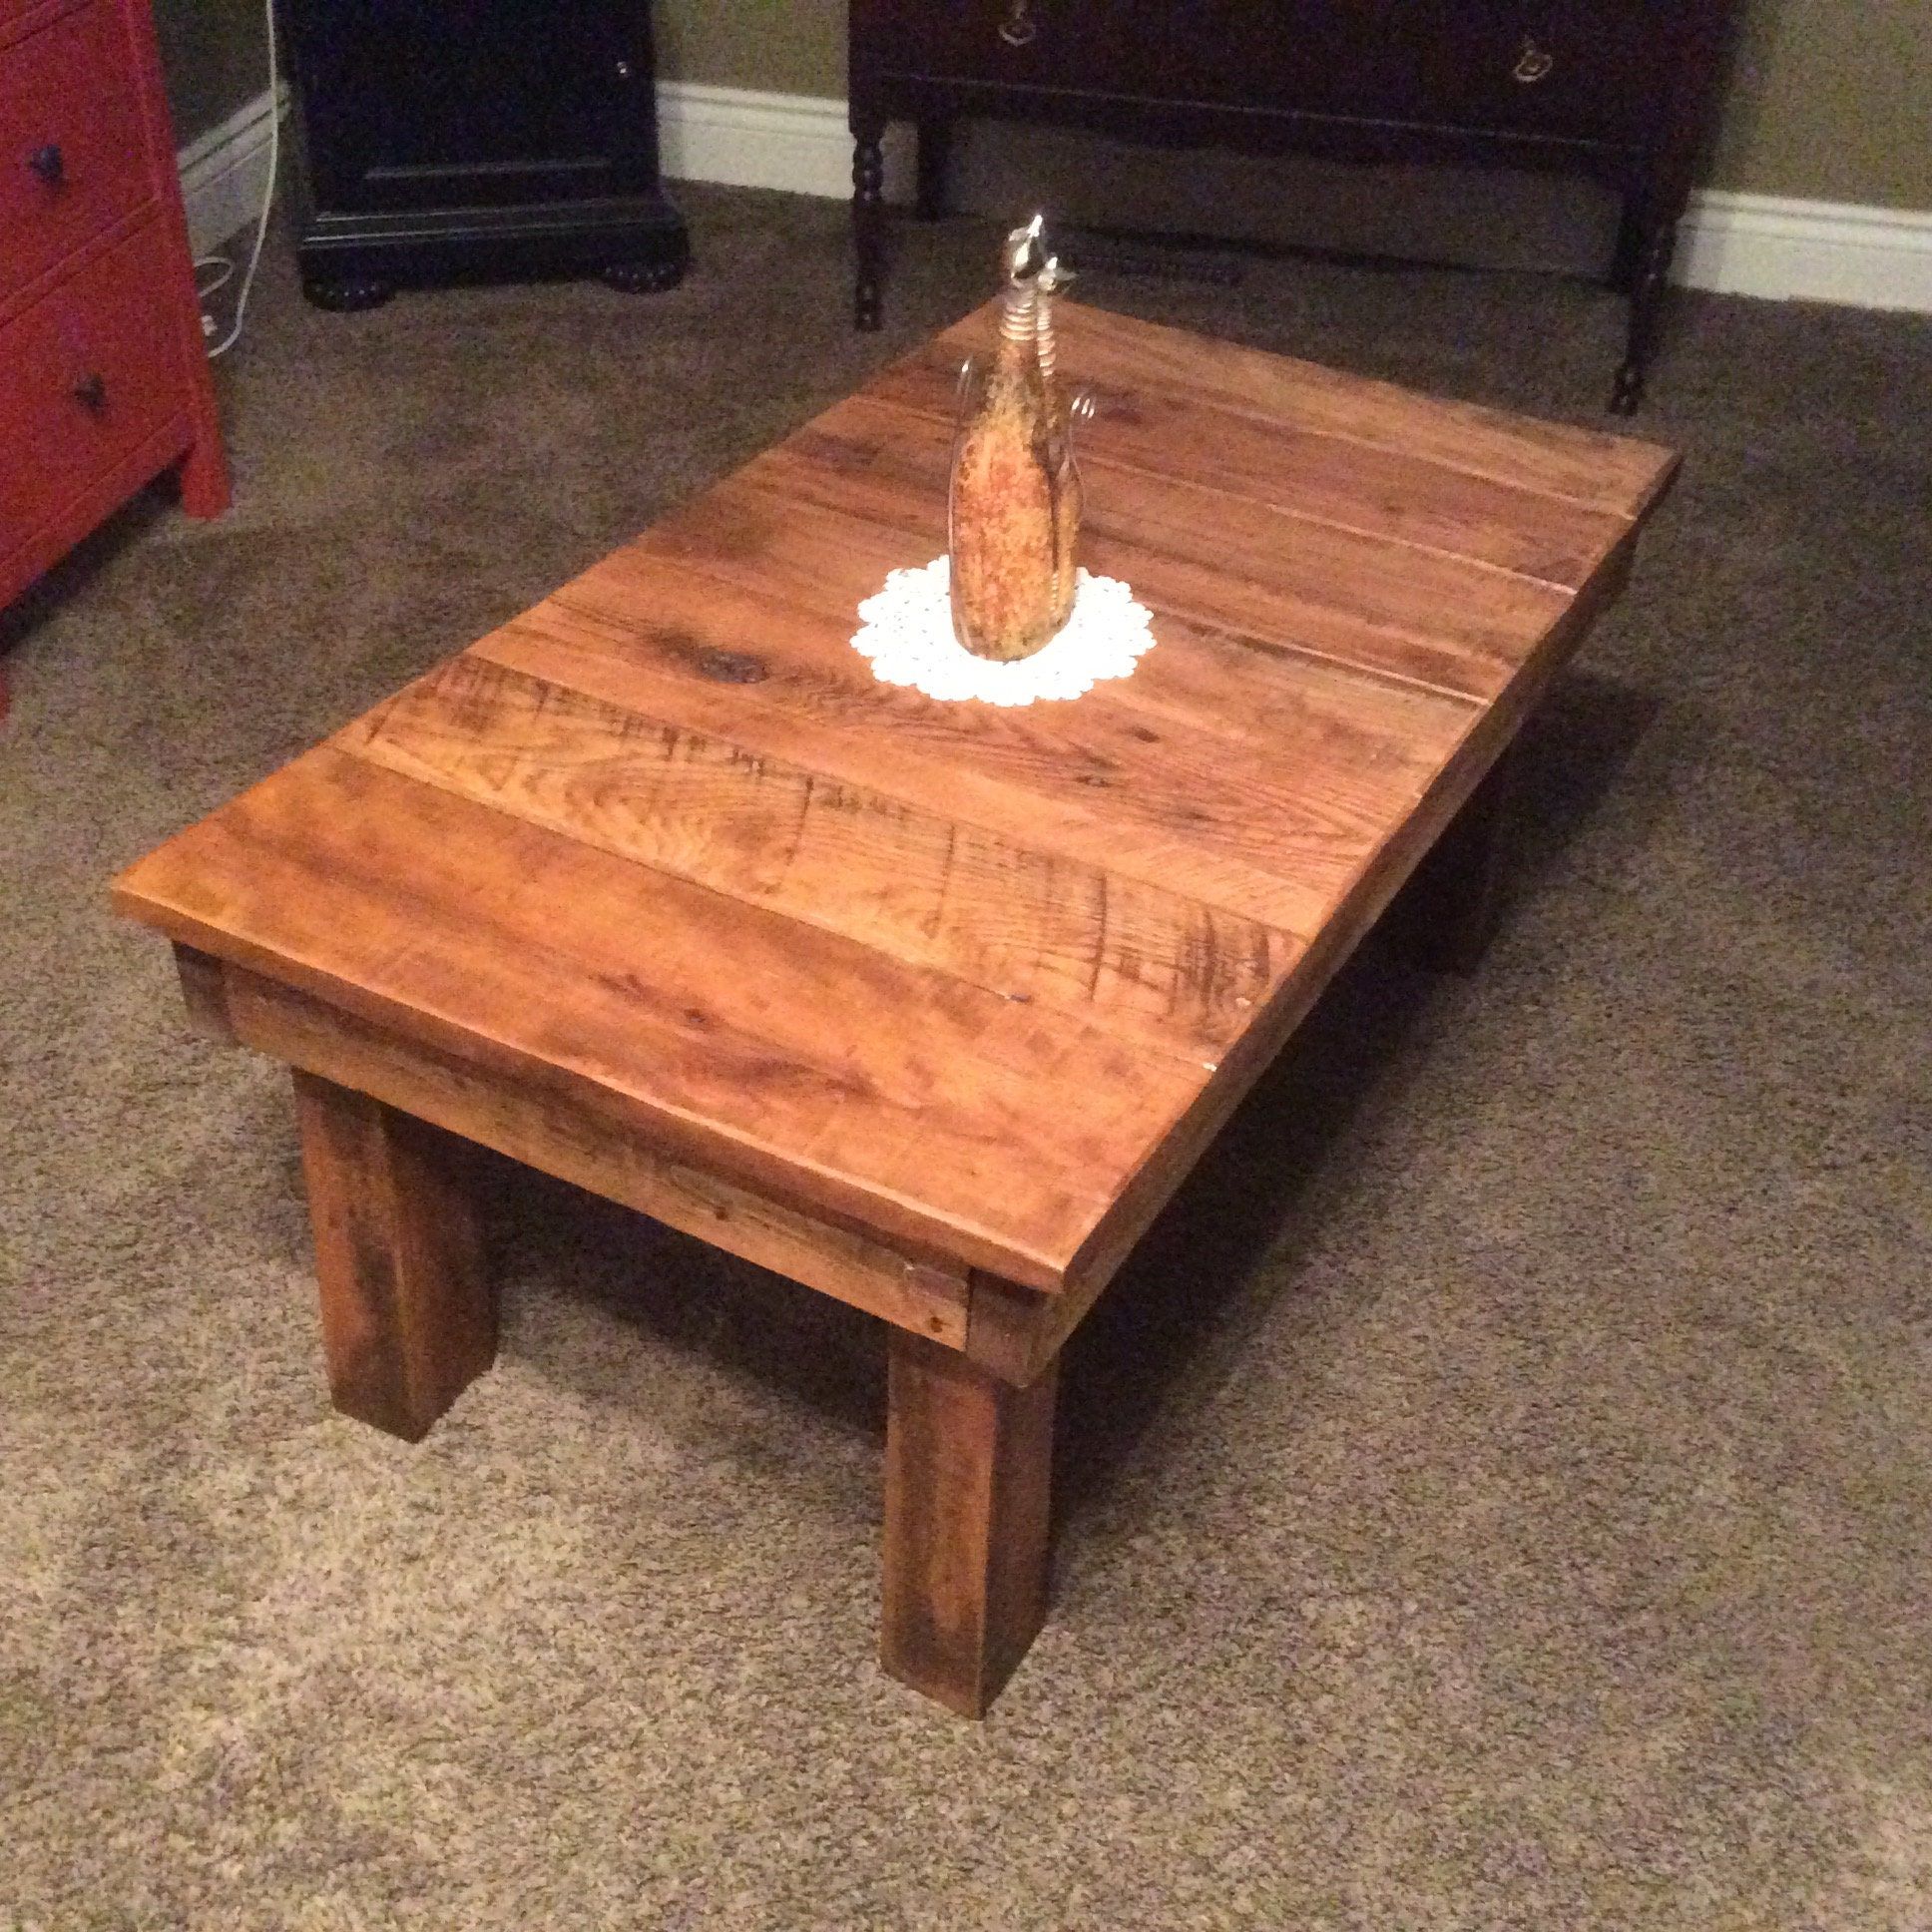 Reclaimed Wood Rustic Coffee Table With Most Popular Barnwood Coffee Tables (View 4 of 20)